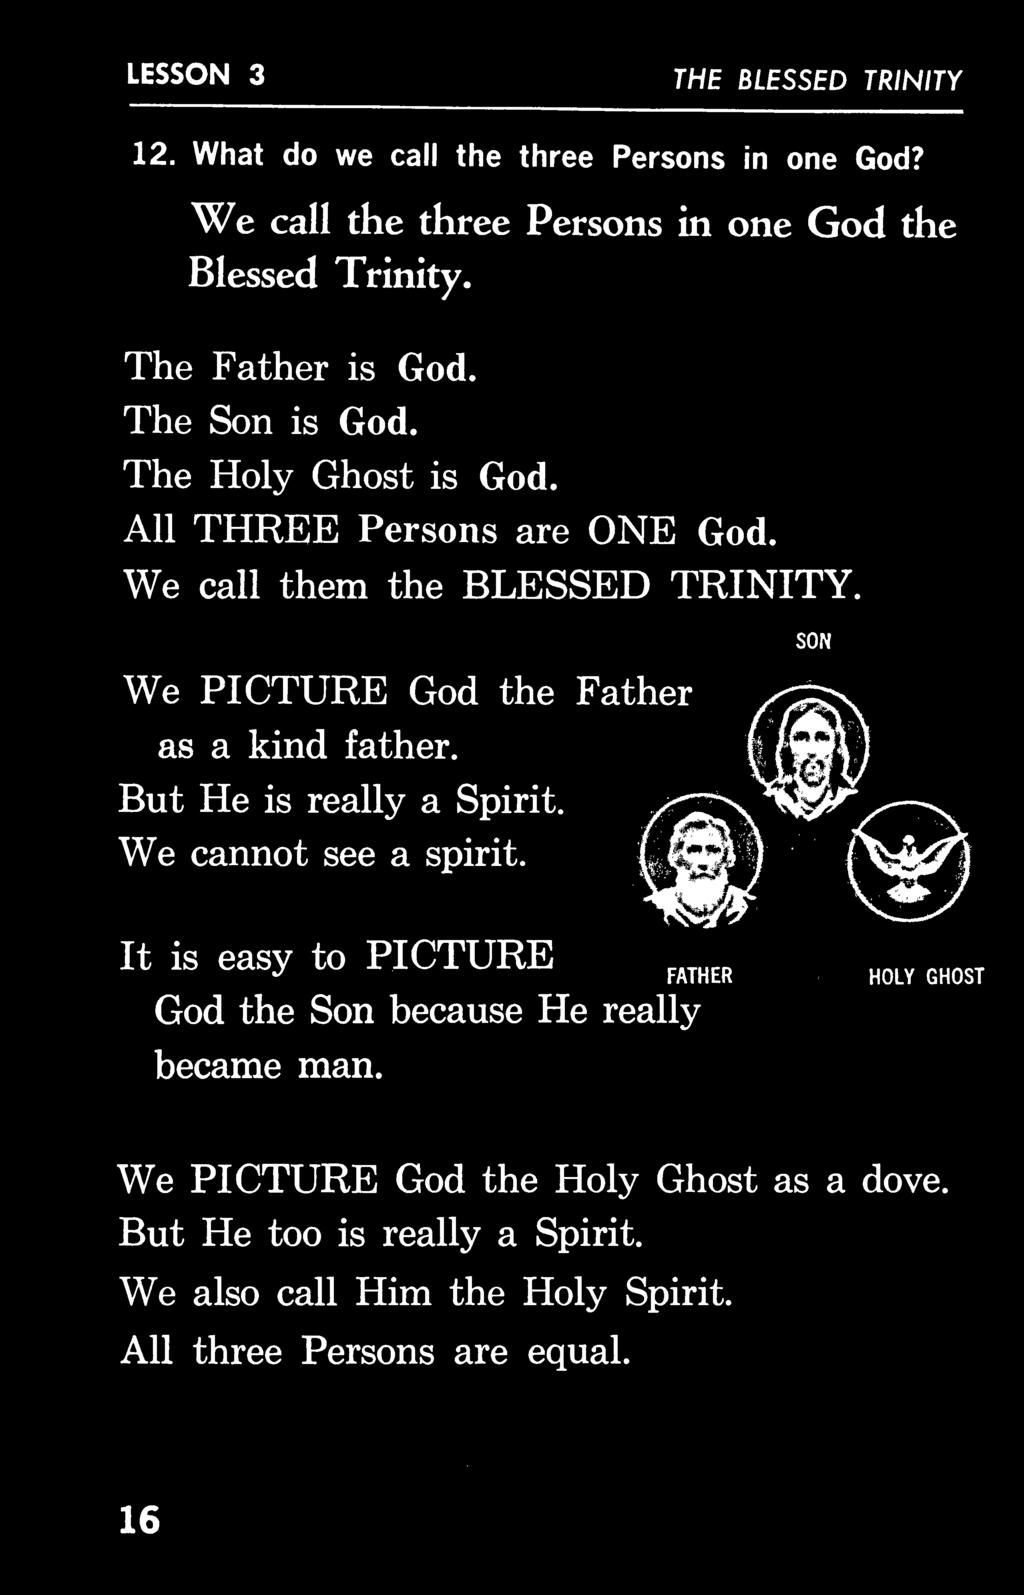 We PICTURE God the Father as a kind father. SON But He is really a Spirit. We cannot see a spirit.